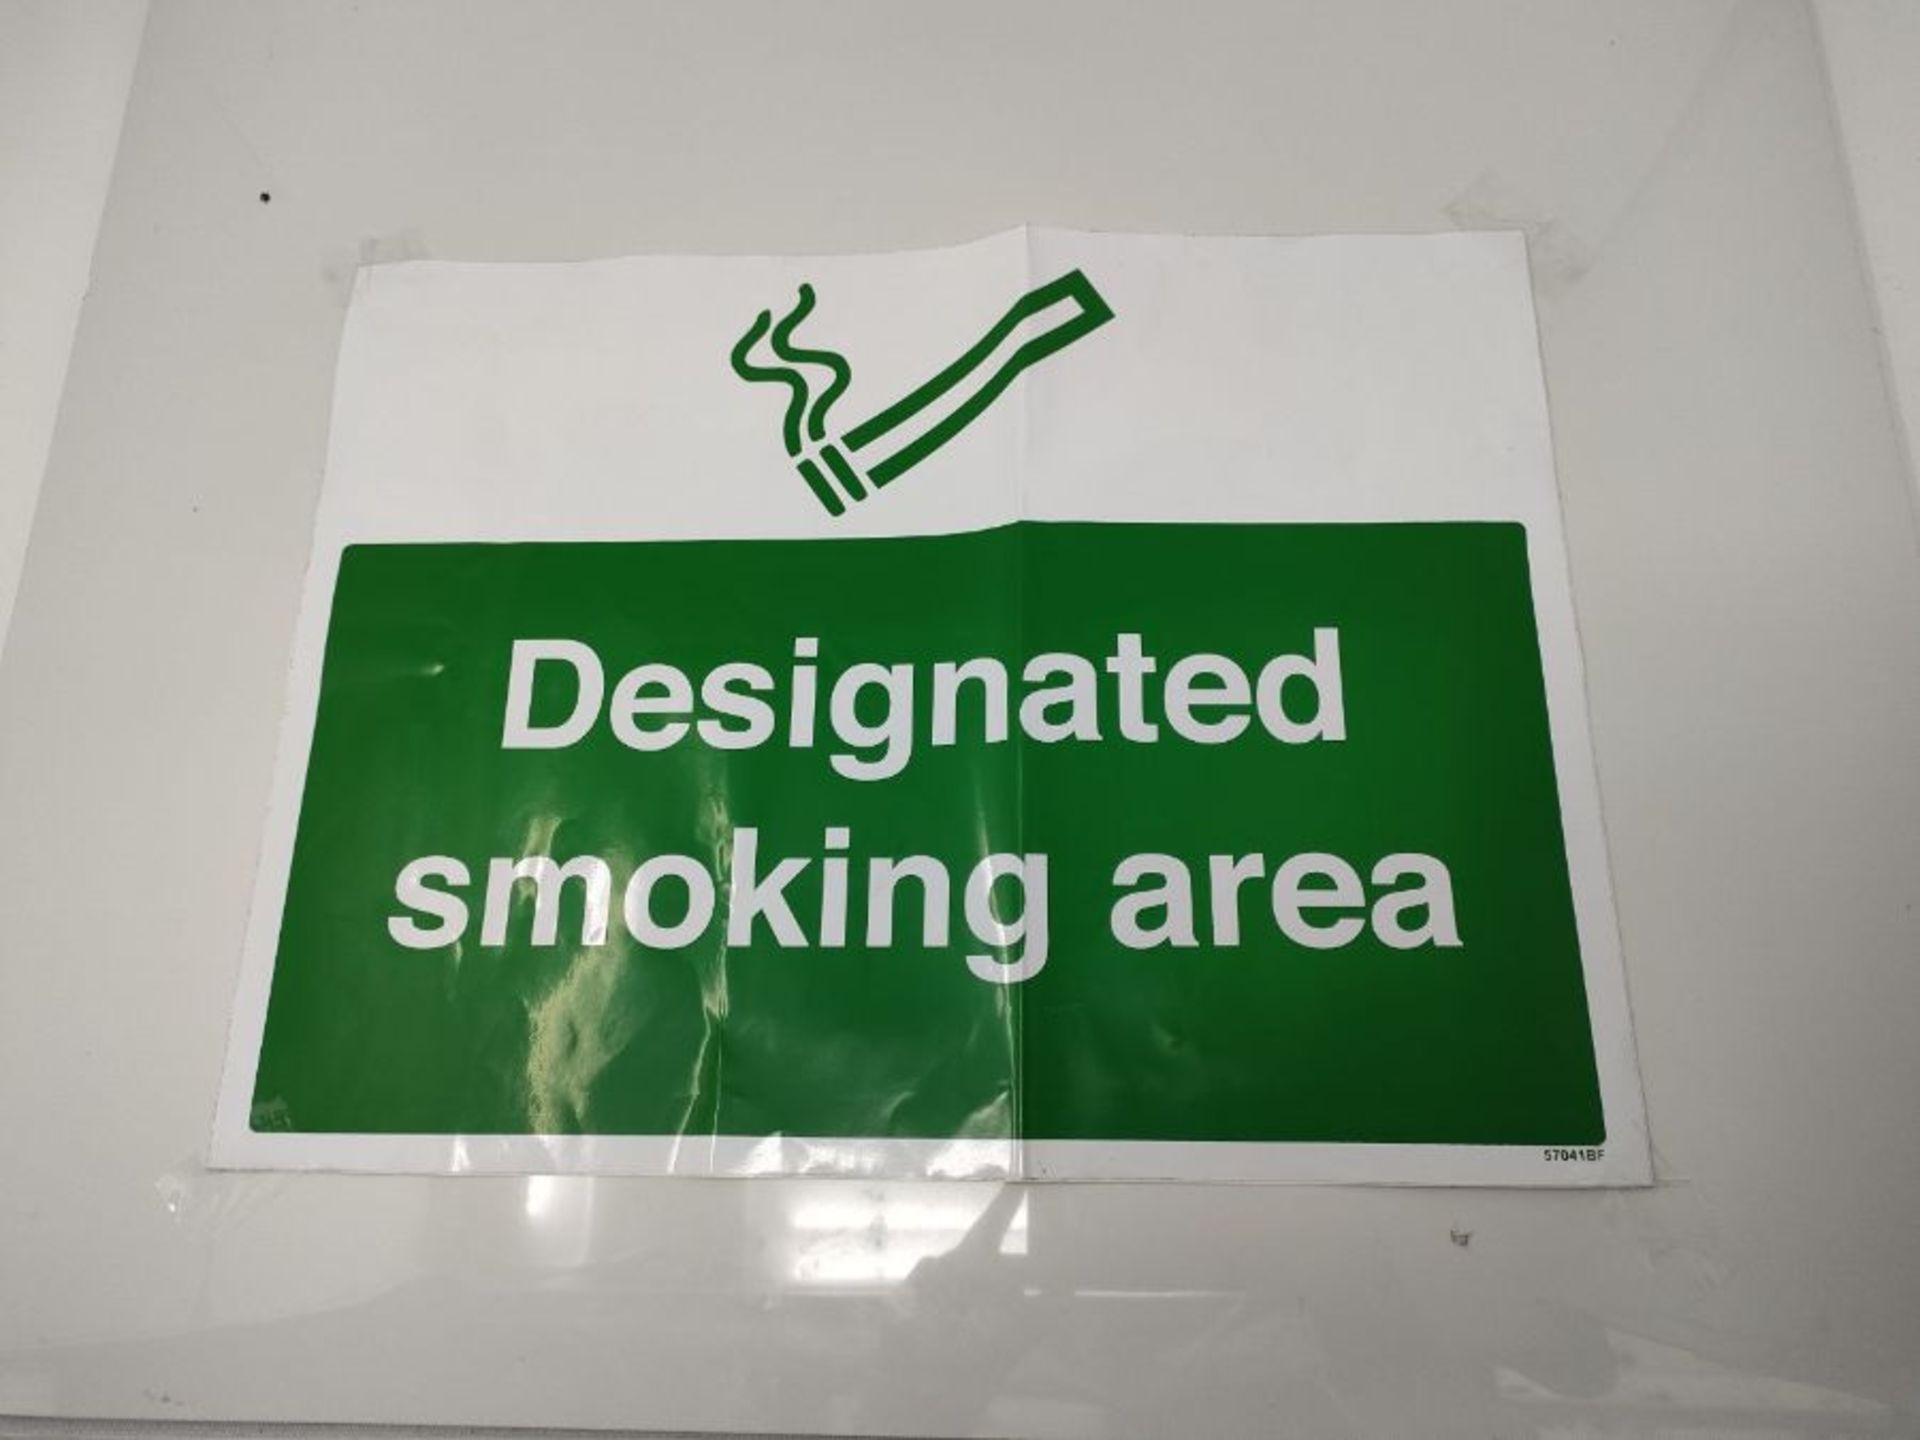 VSafety Designated Smoking Area Prohibition Sign - Landscape - 600mm x 450mm - Self Ad - Image 2 of 3